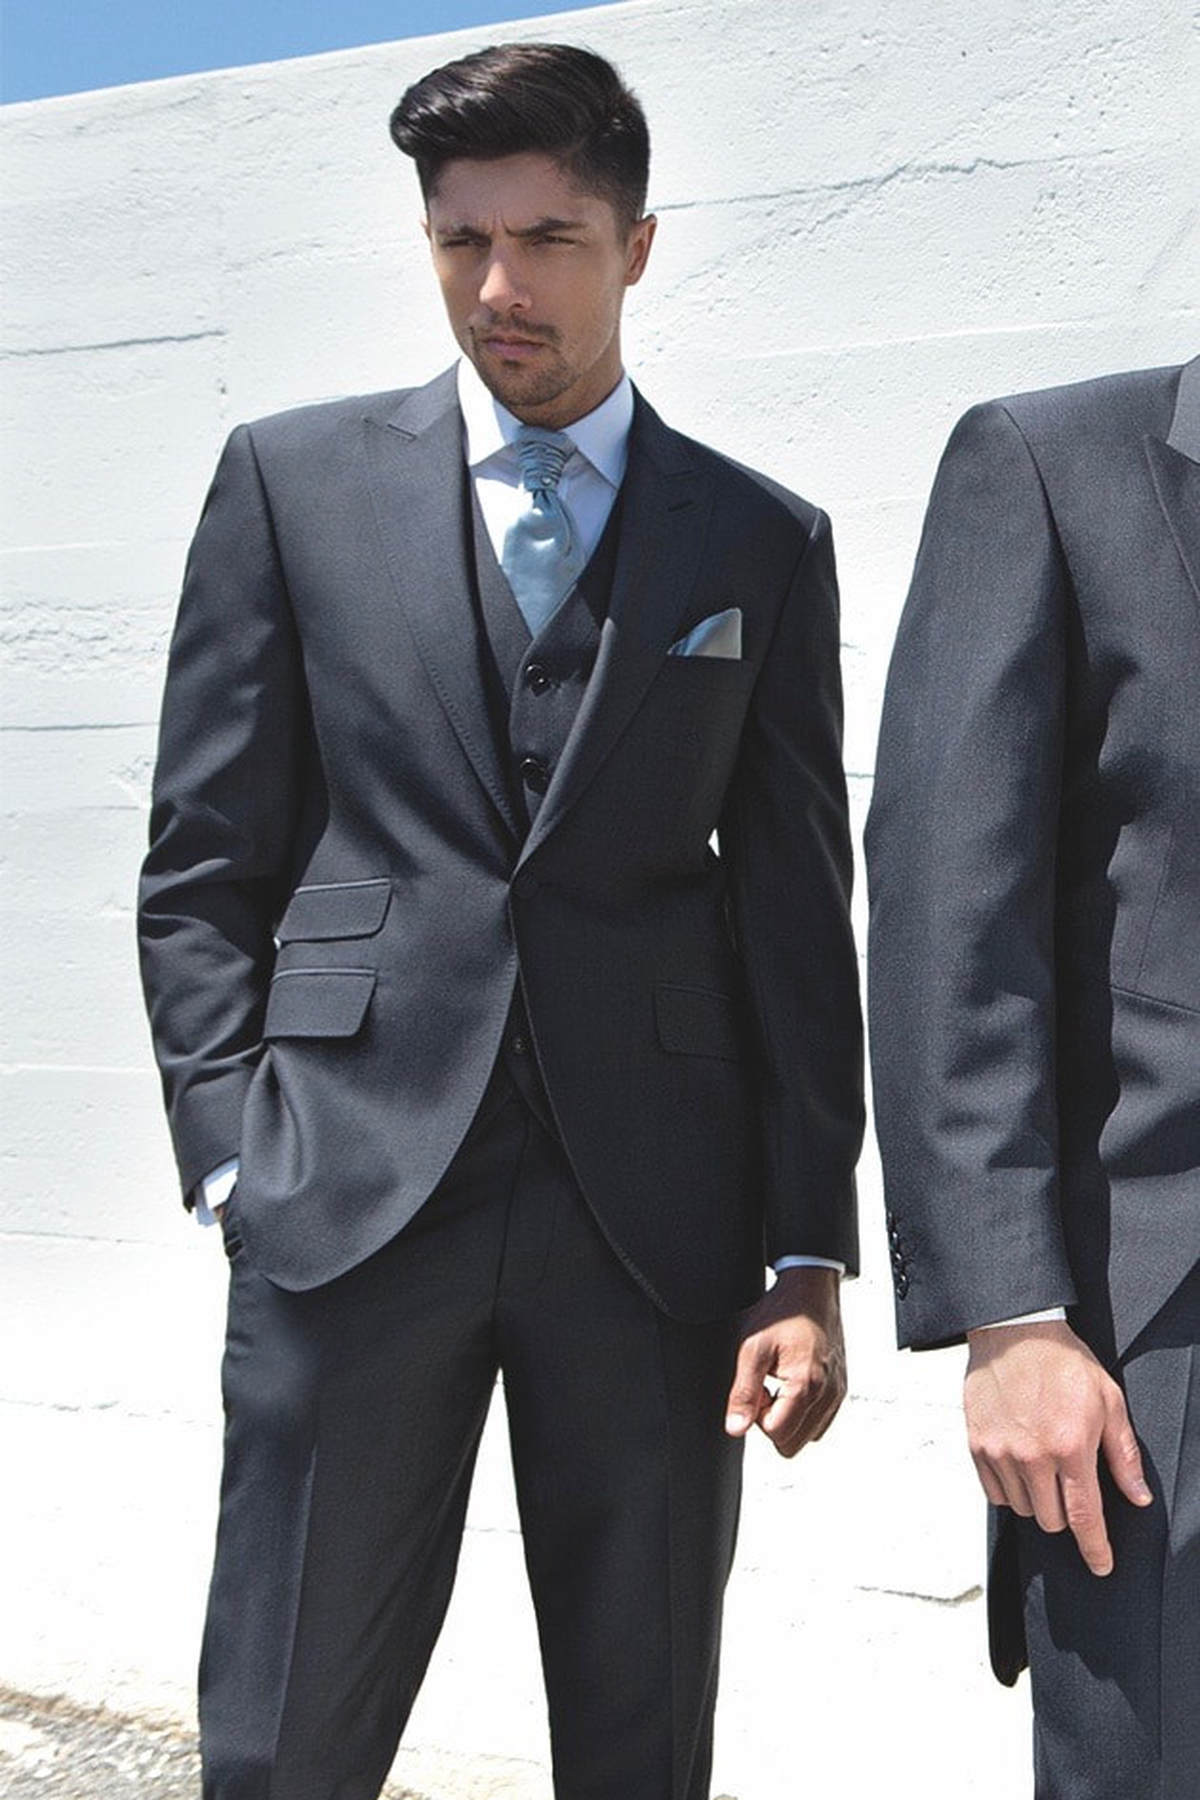 CHARCOAL GREY TAILS OR SUIT HIRE - PARKERS FORMAL WEAR